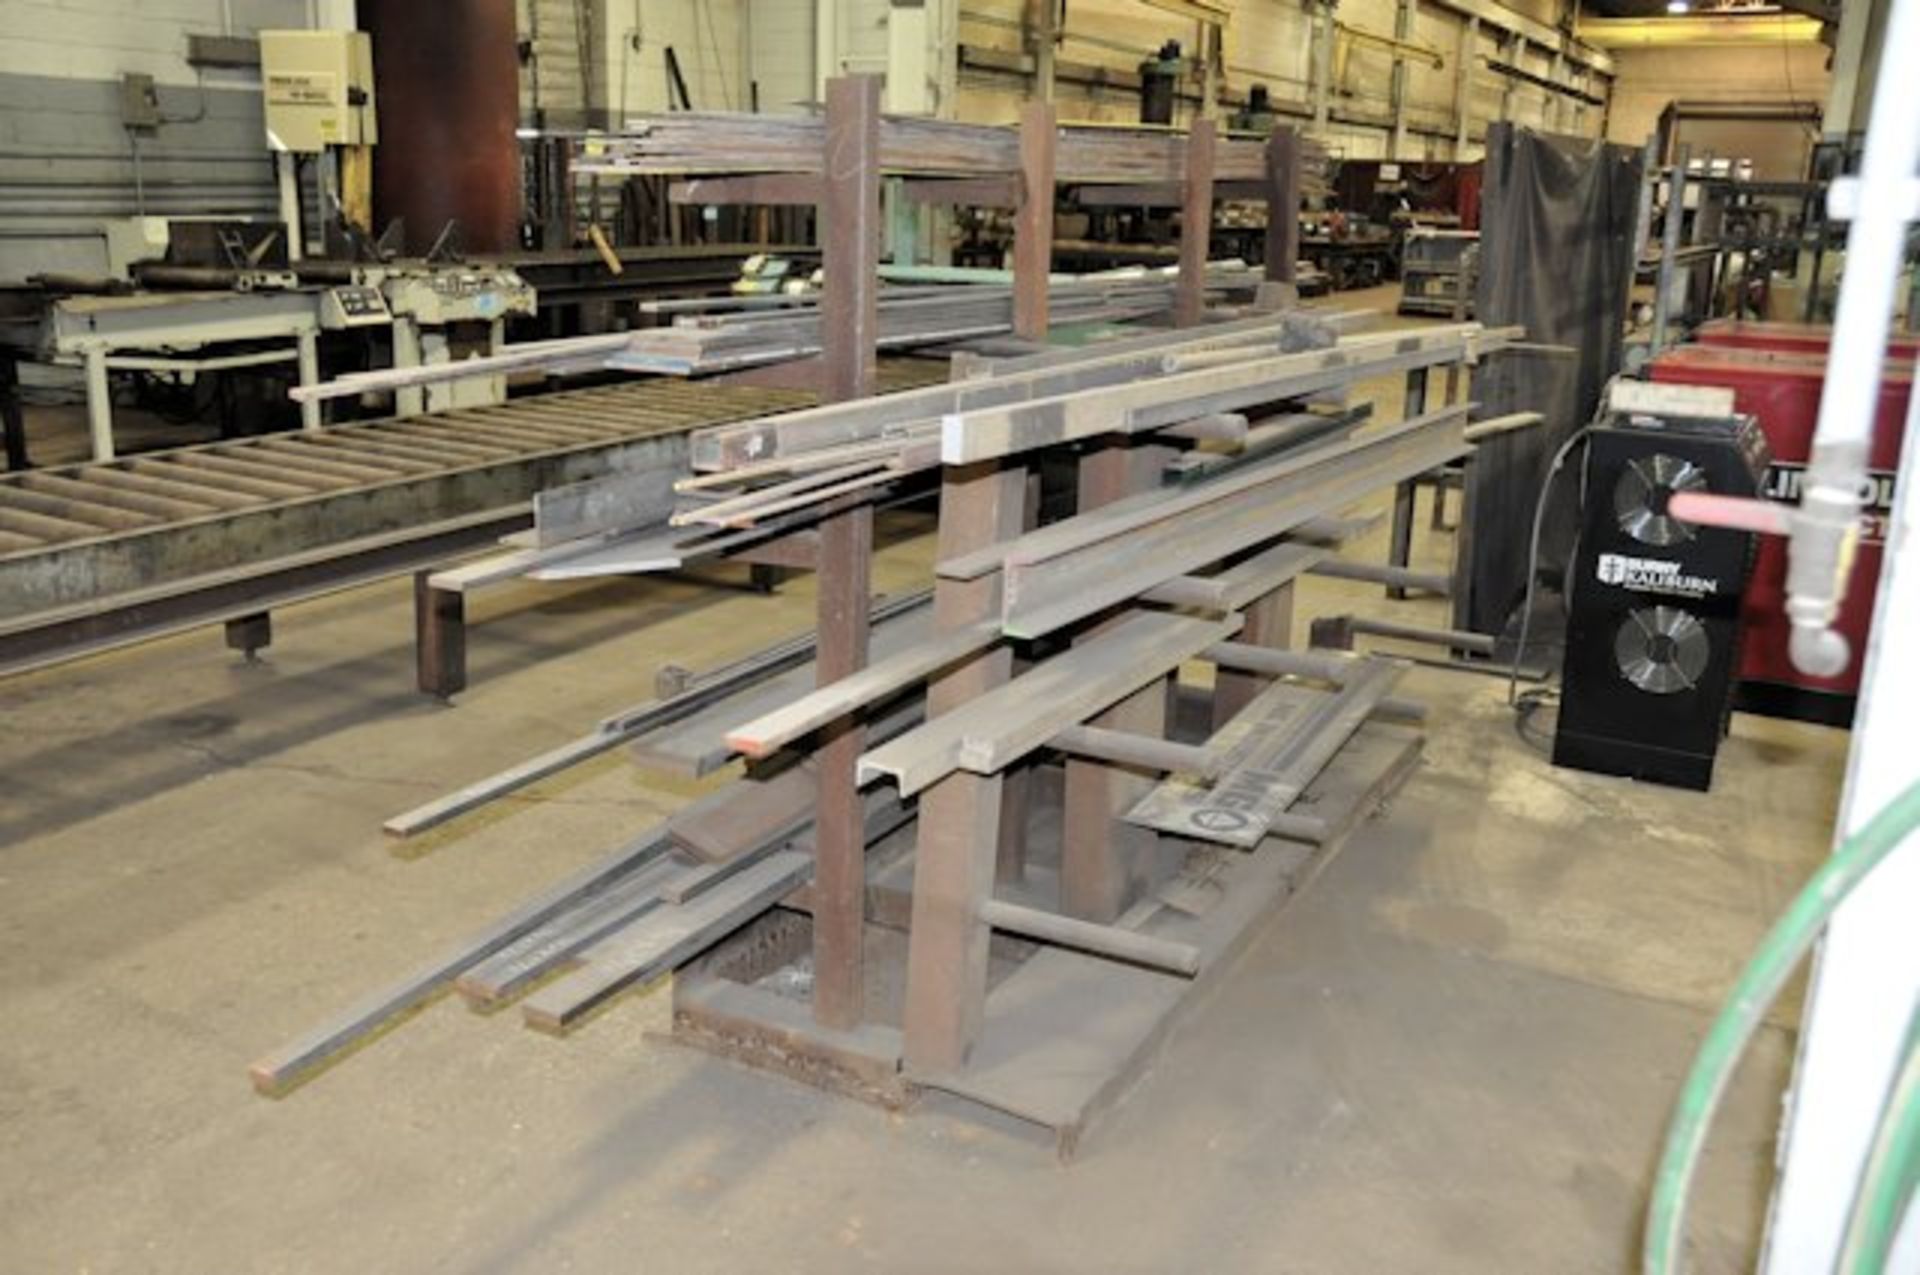 Lot-Steel Stock Consisting of: Flat Bar Stock; Angle Iron and C-Channel; Rack included - Image 2 of 4